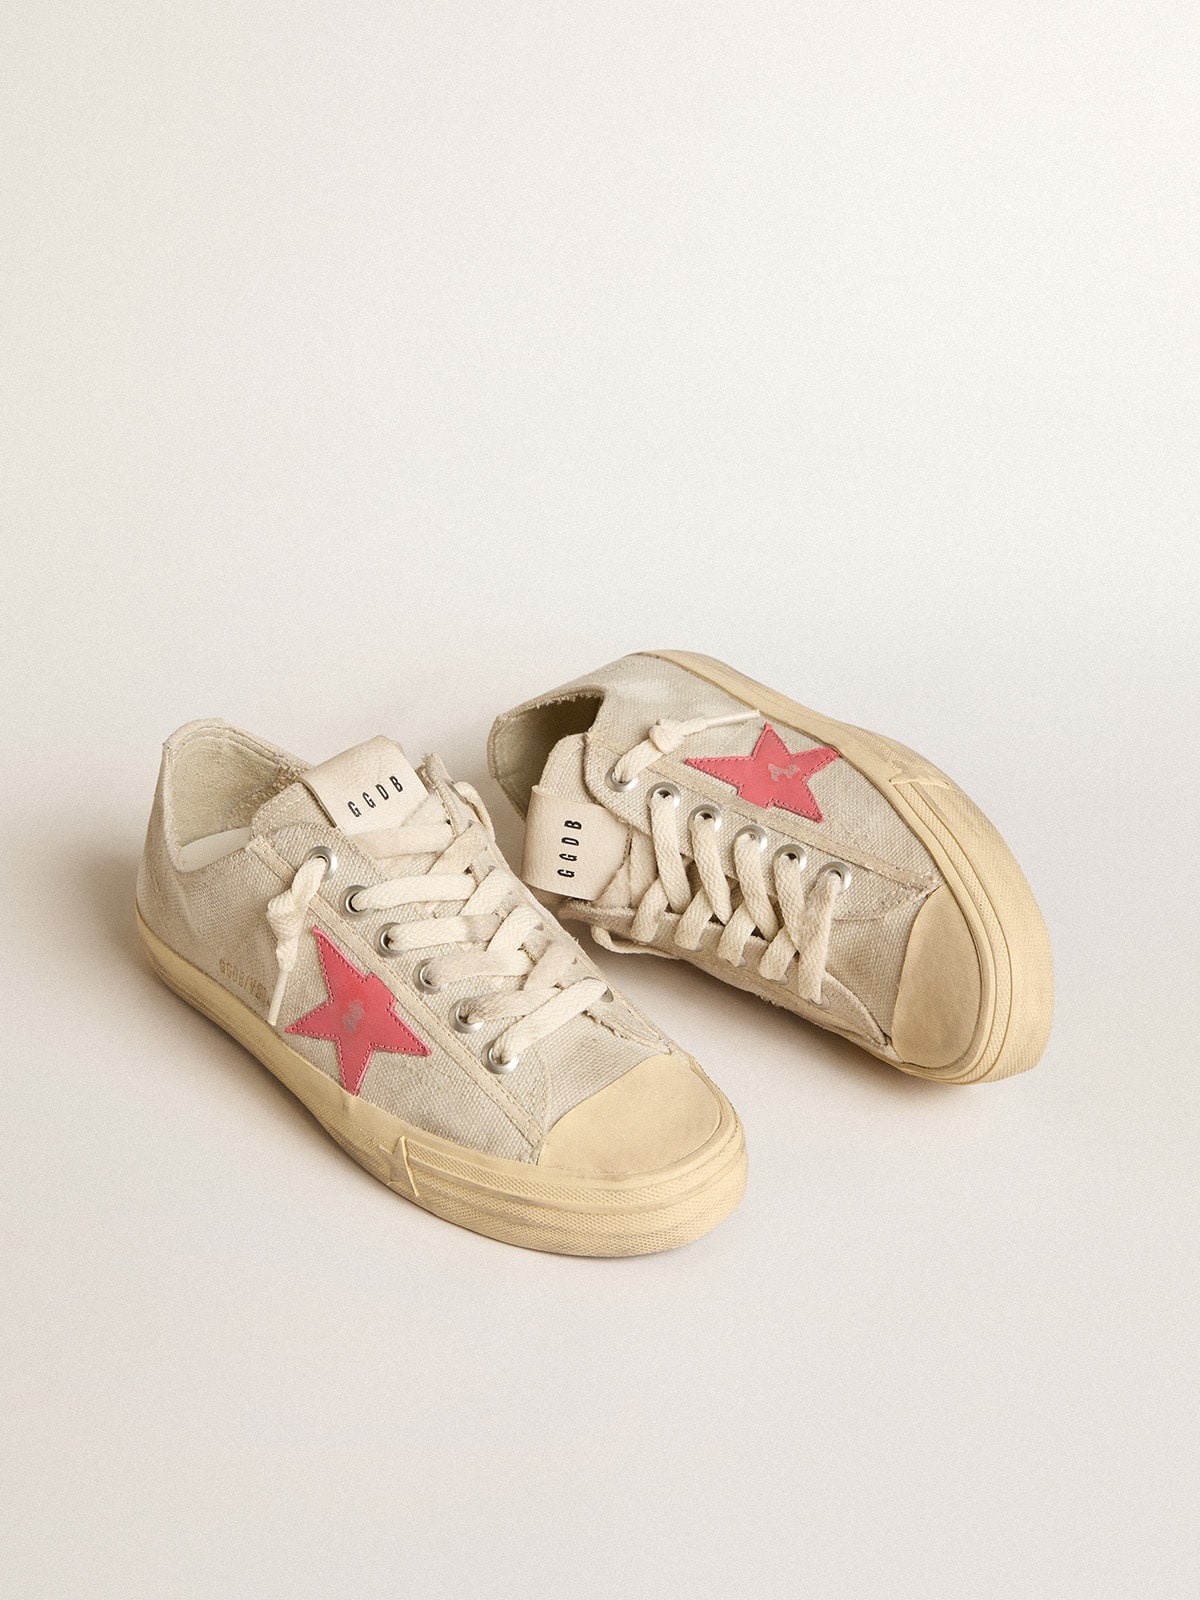 Women's V-Star in light gray canvas with a red leather star - 2